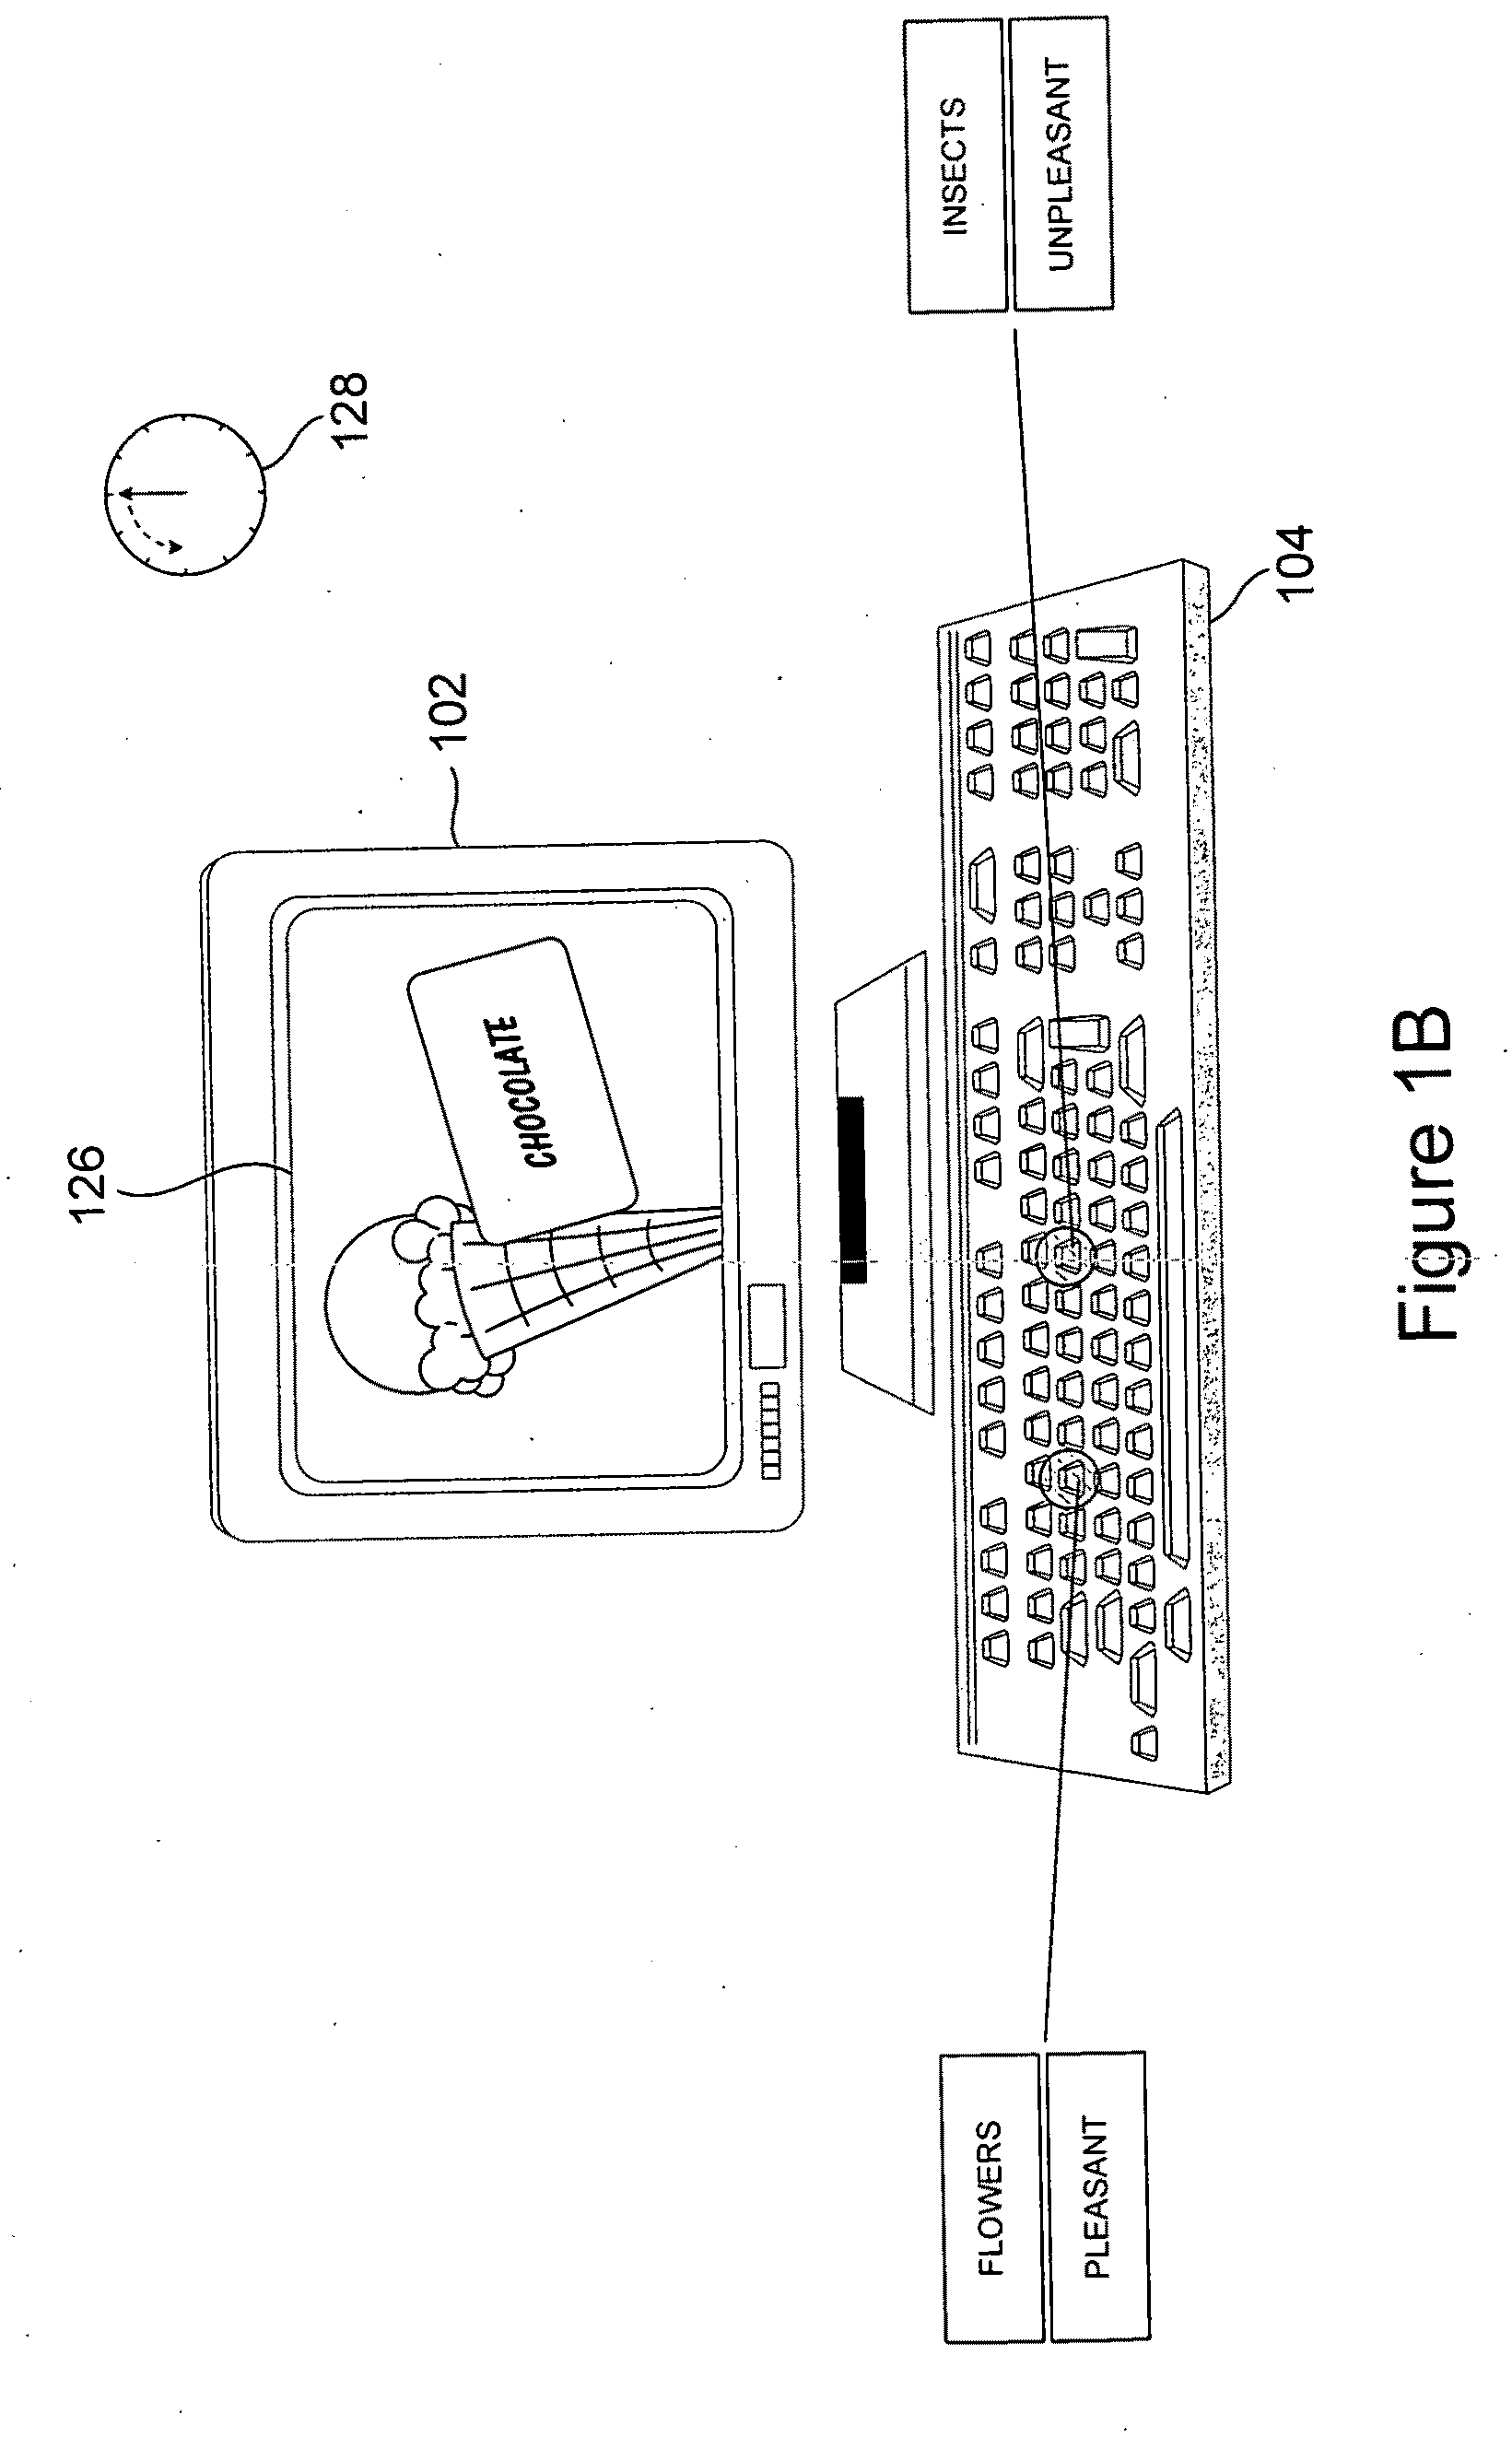 Method and system for developing and administering subject-appropriate implicit tests of association